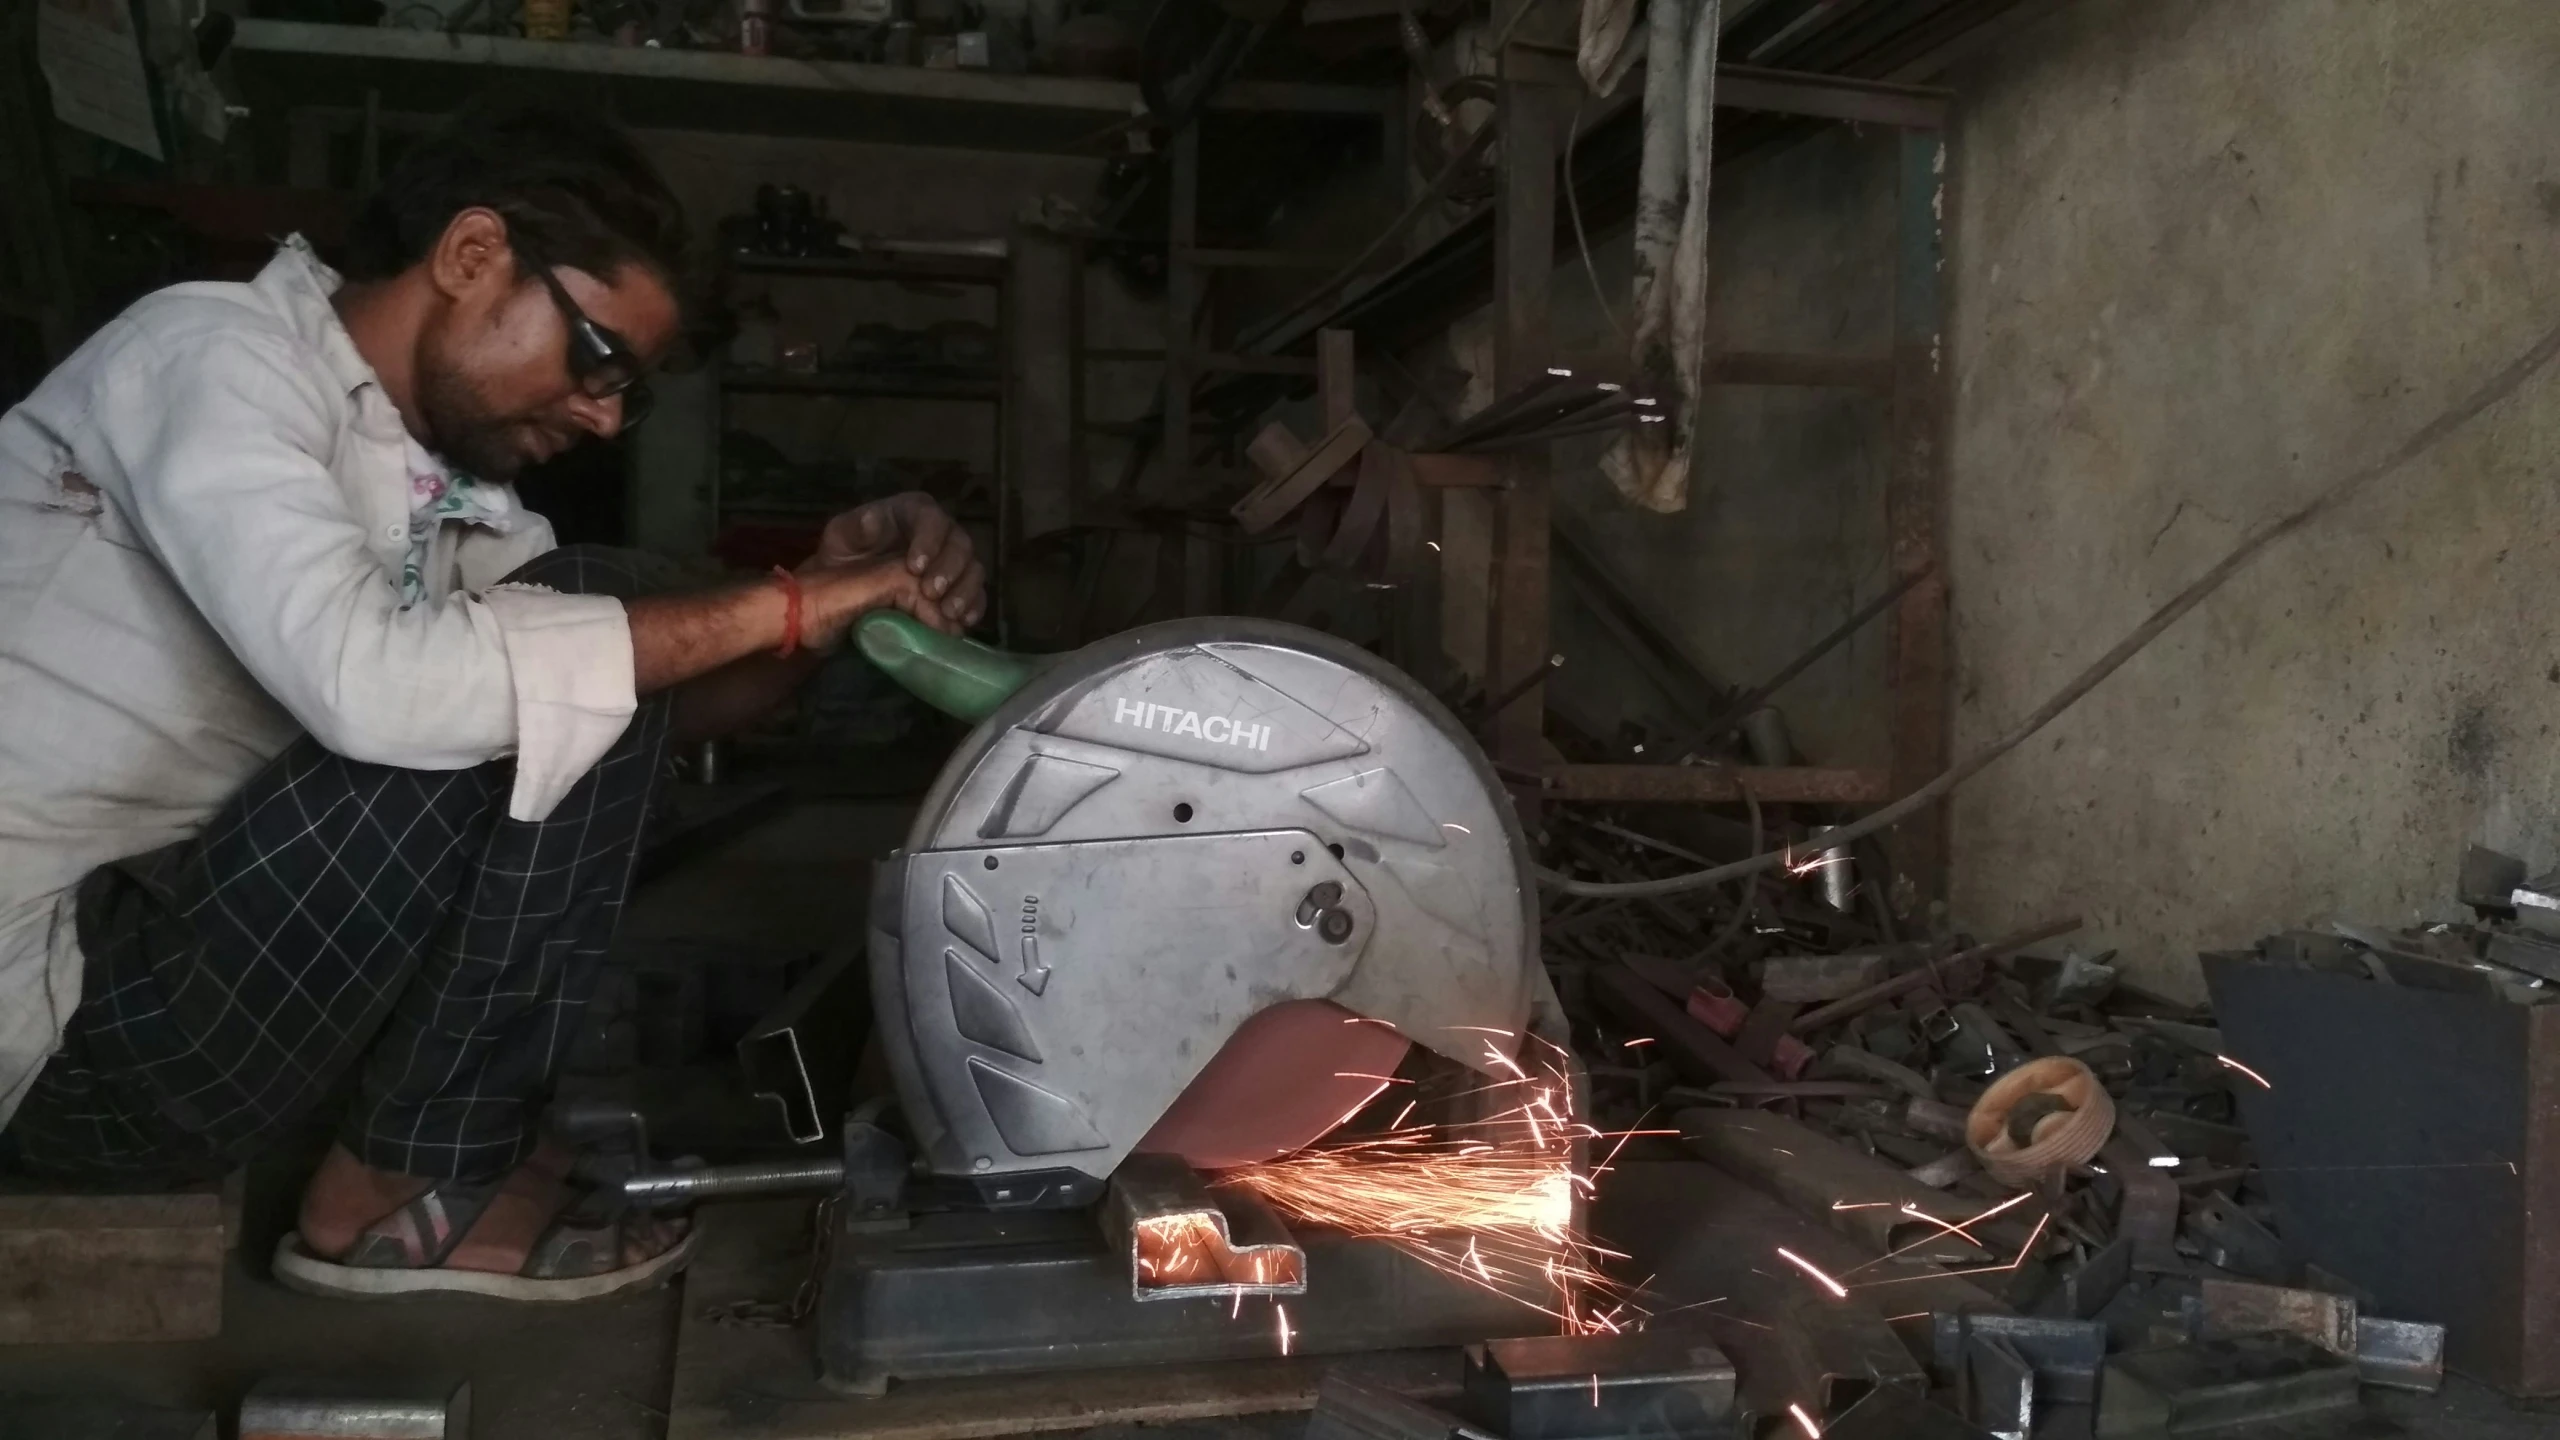 a man is welding soing with a large metal object